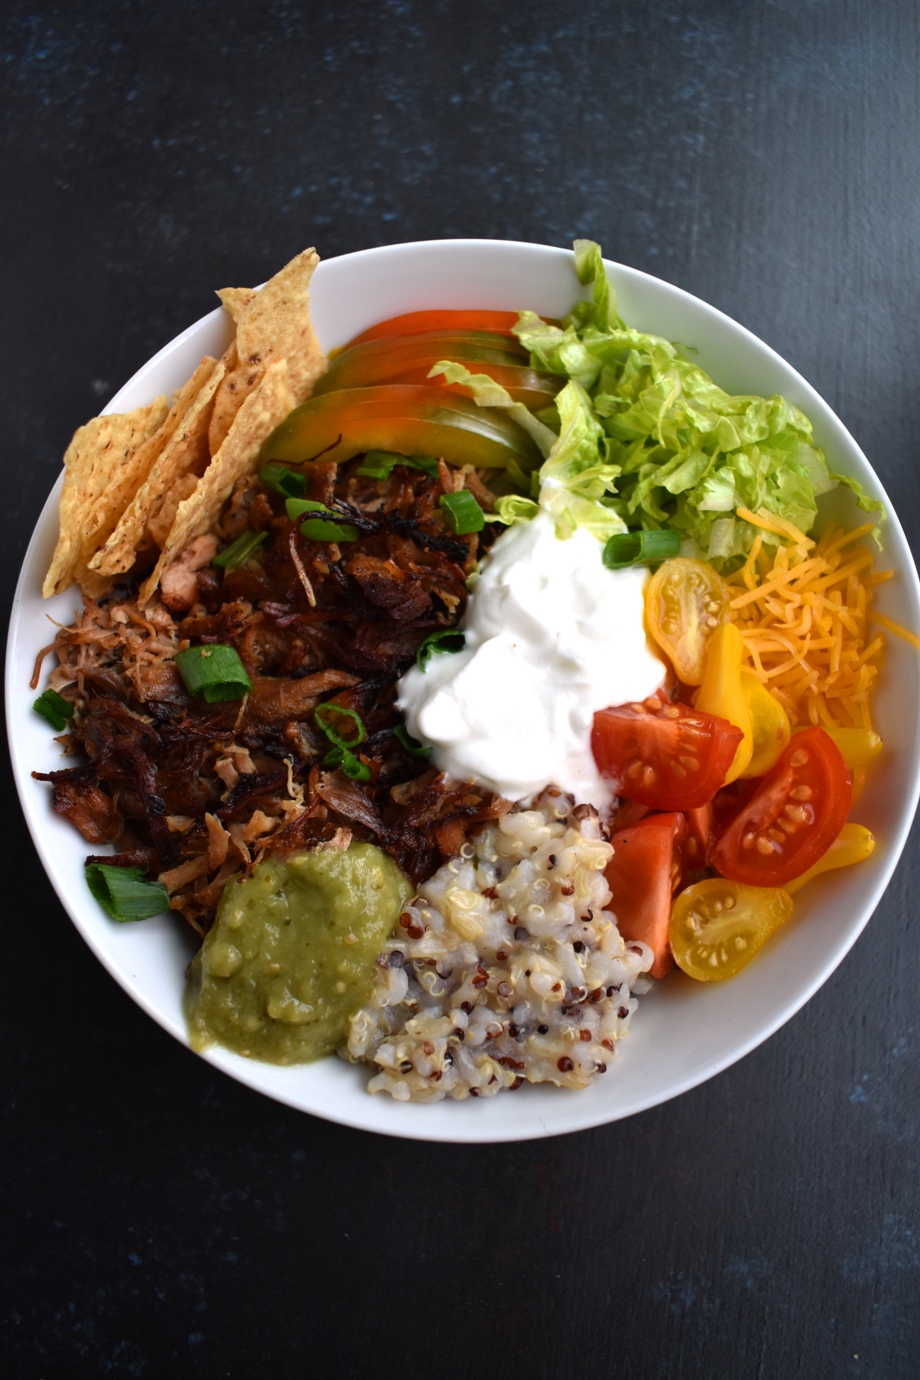 Carnitas Burrito Bowls feature crispy, flavorful pork carnitas, brown rice, cheddar cheese, tomato, green onion, chips, bell peppers and more for a fresh, filling meal ready in about 30 minutes! www.nutritionistreviews.com #mexicanfood #mexican #burrito #pork #dinner #easydinner